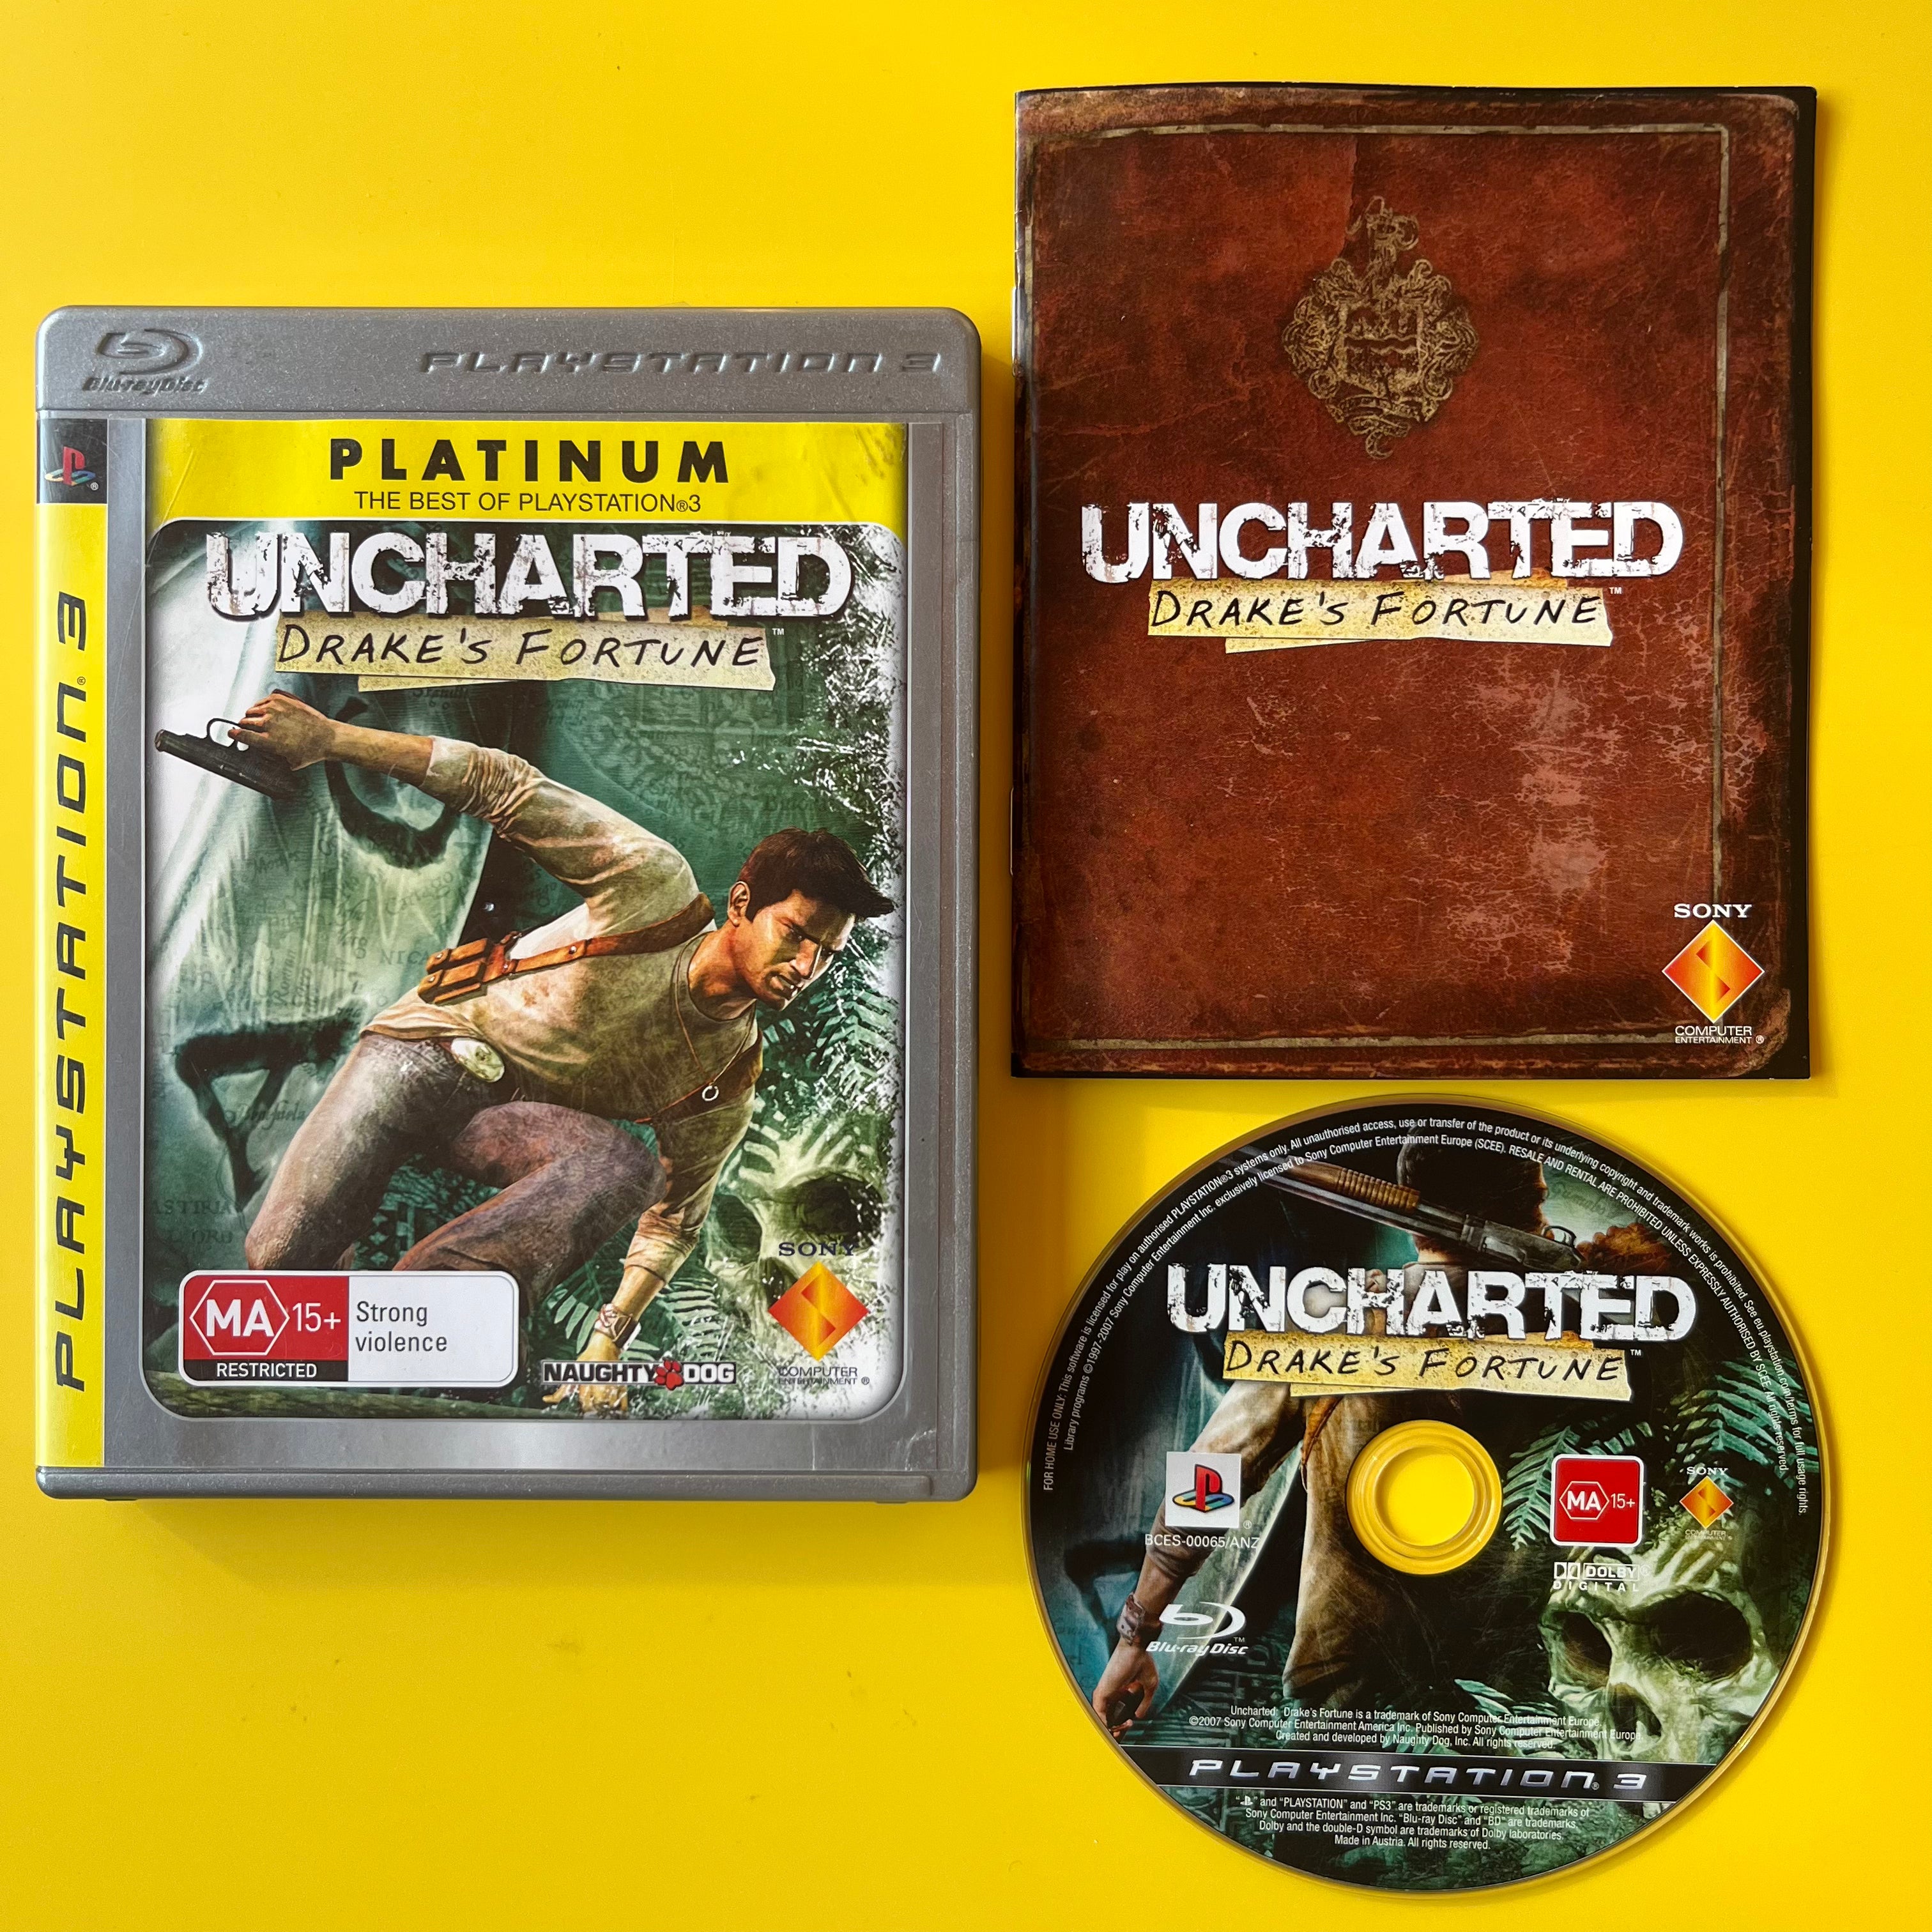 PS3 - Uncharted Drake’s Fortune - Platinum